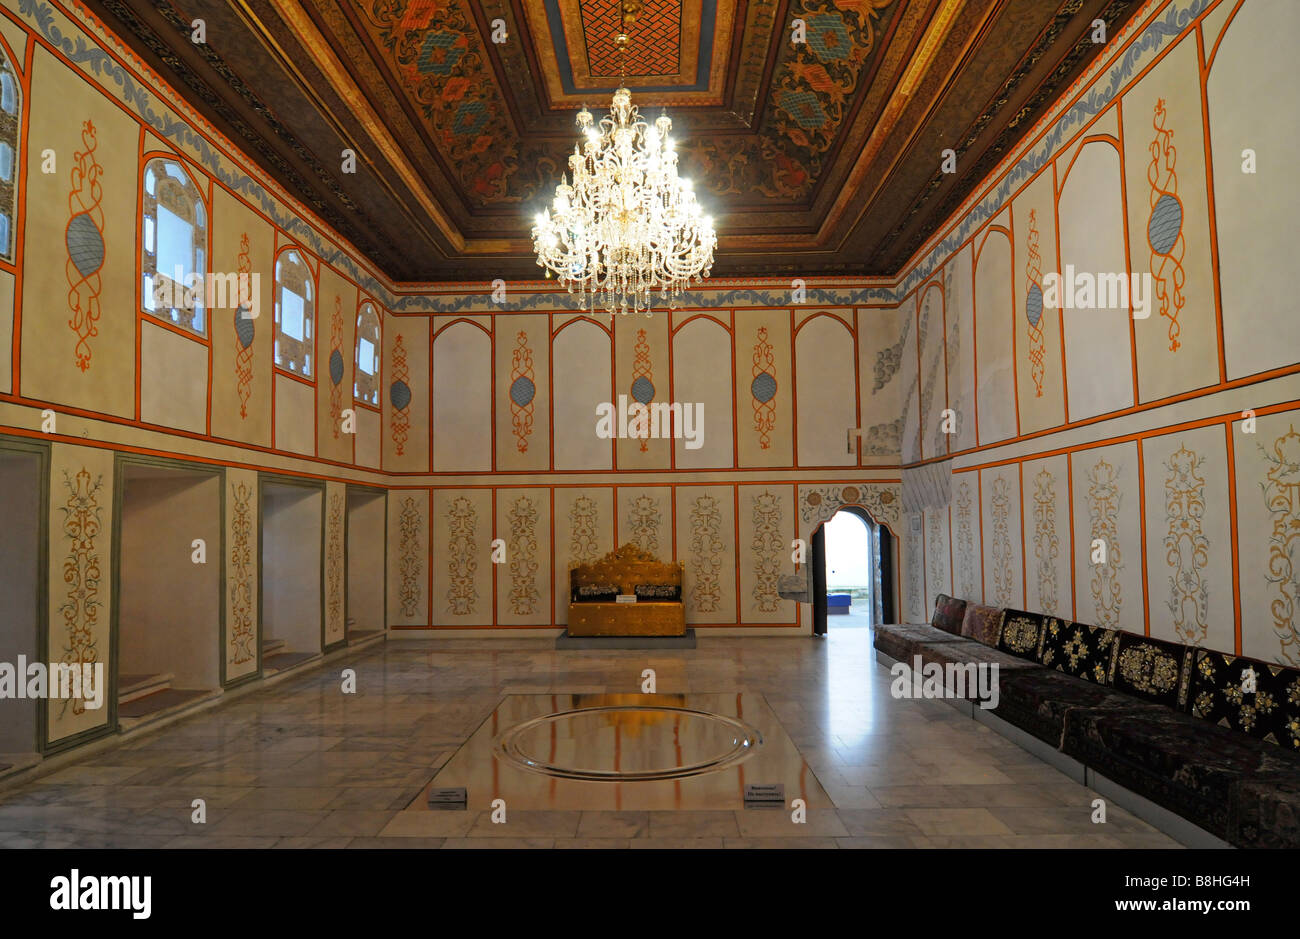 Interior of the former Palace of the Crimean Khans in Bakhchisaray, Crimea, Ukraine. Stock Photo